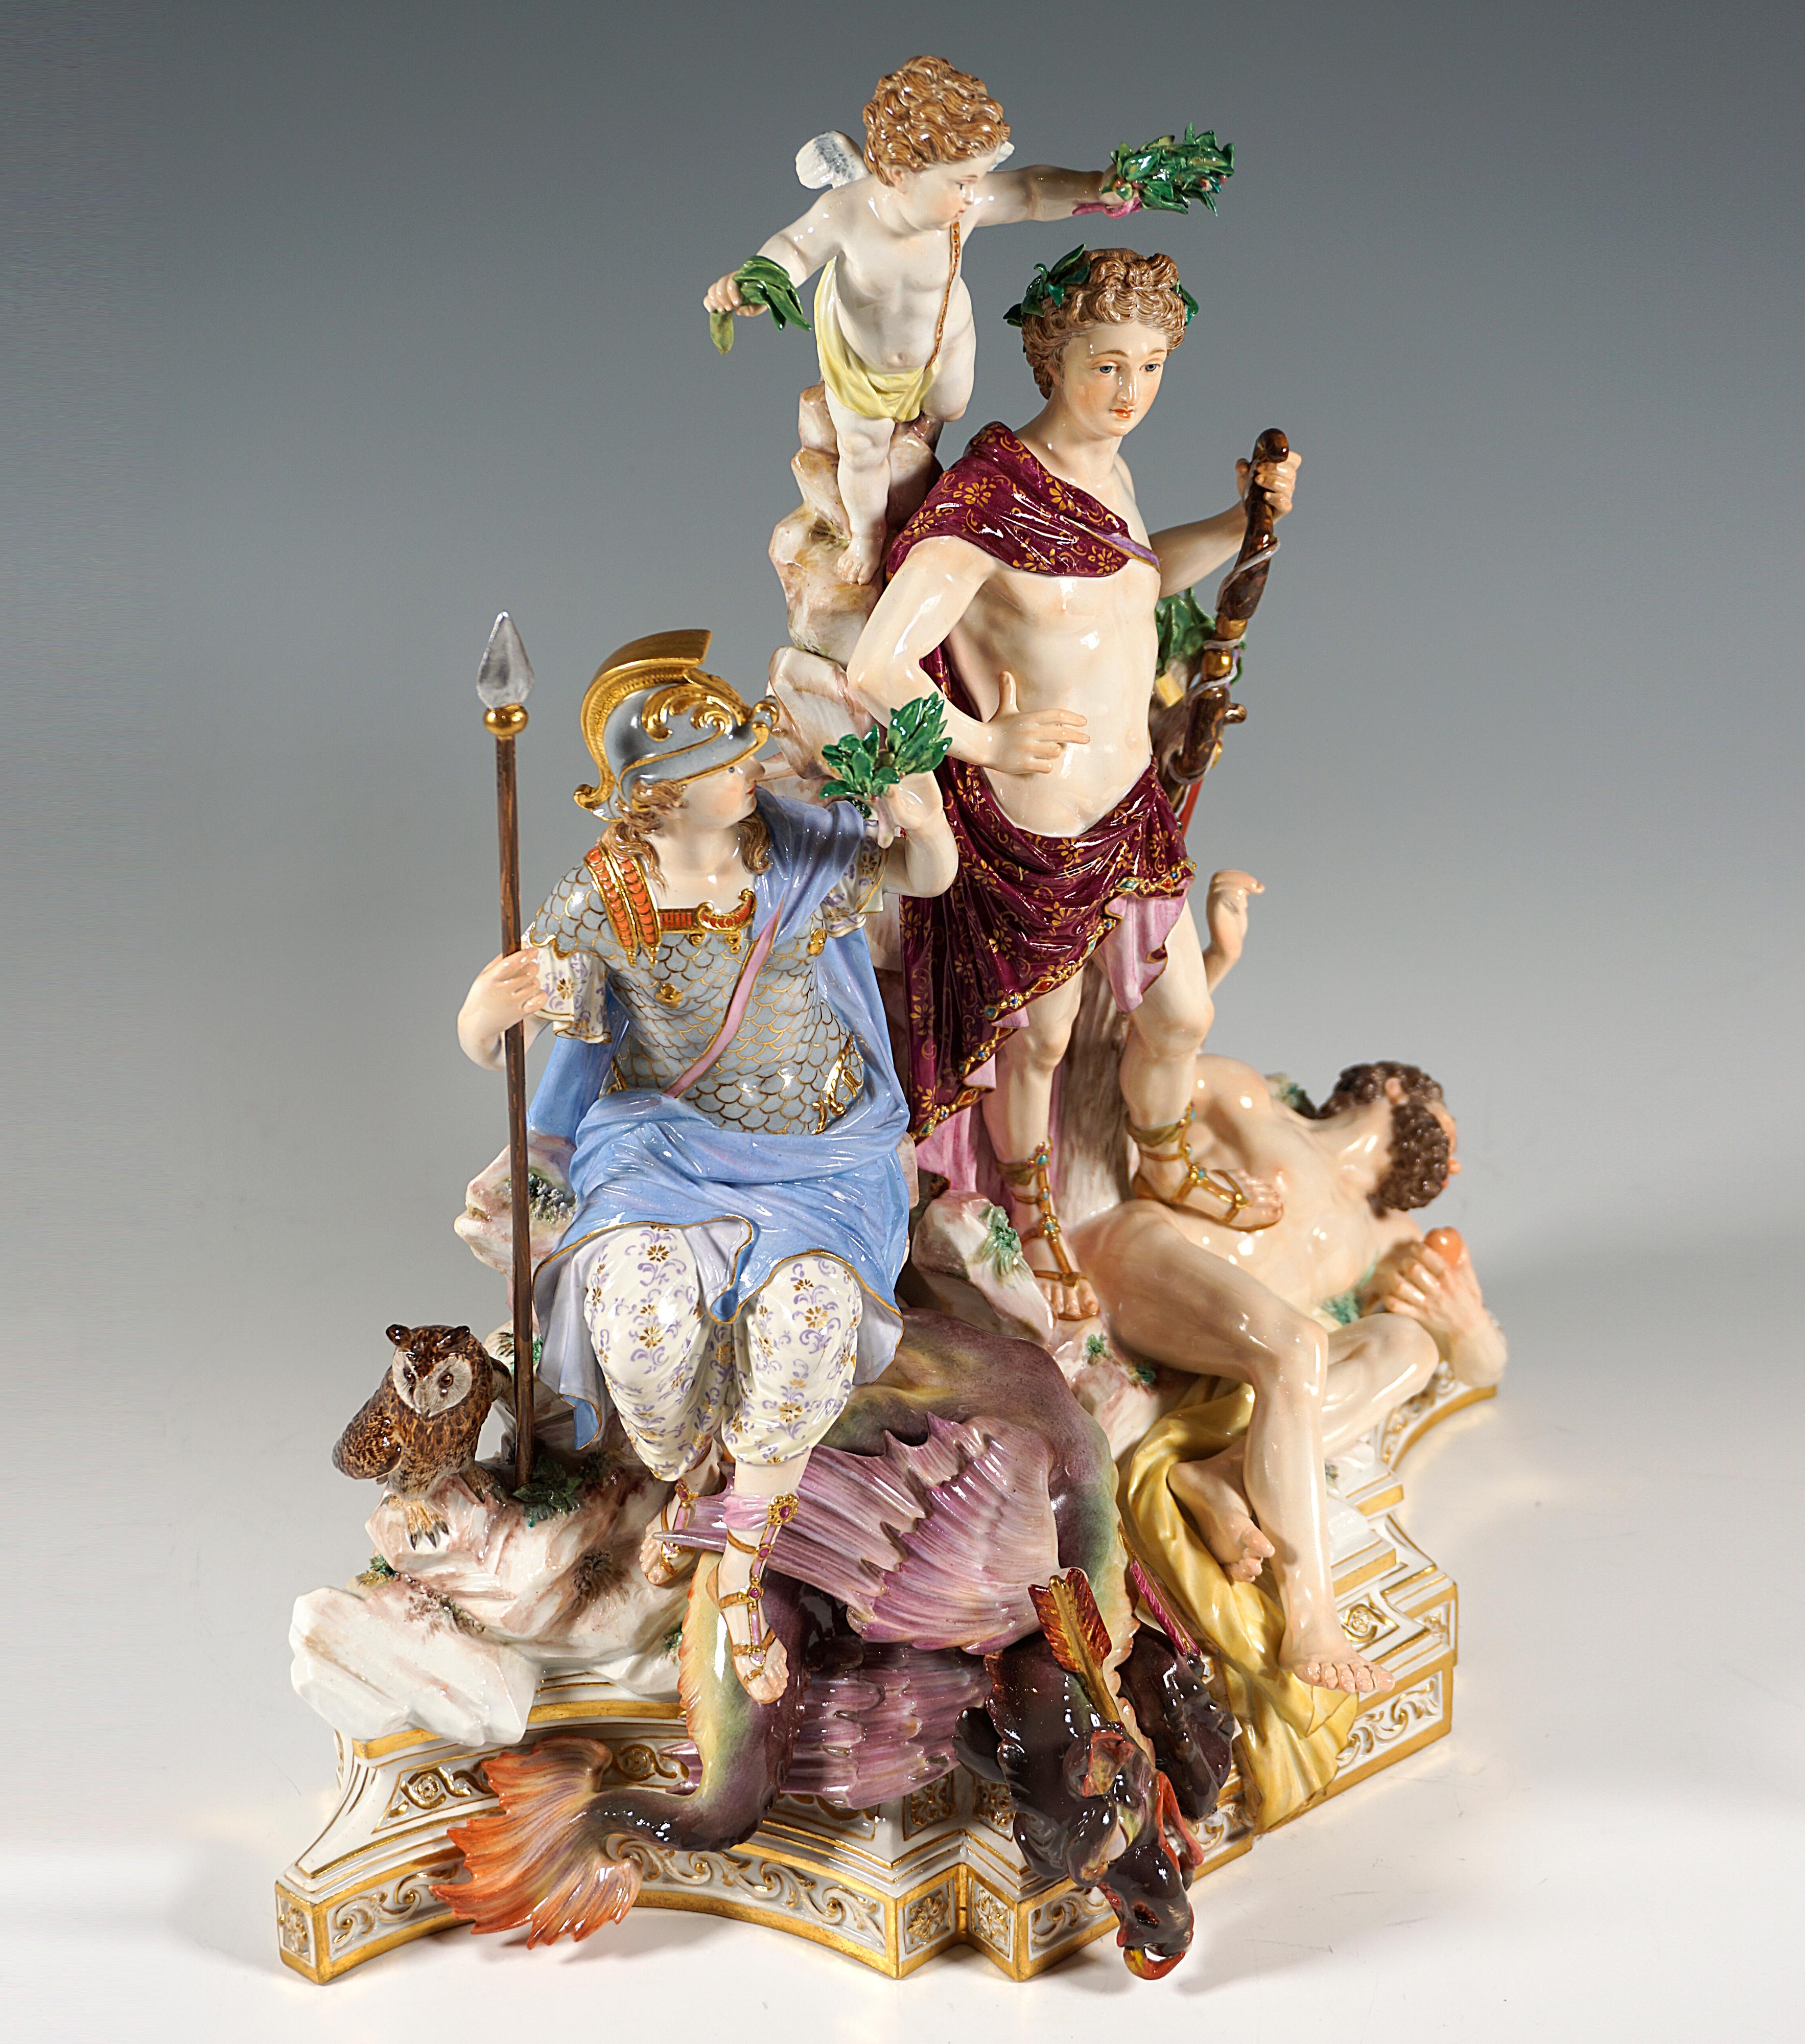 Very rare and excellent porcelain sculpture:
Kaendler created the group Apollo and Python as a triangular composition in March and May of1774. Apollo stands in the highest place as the radiant victor over the dragon Python and over the